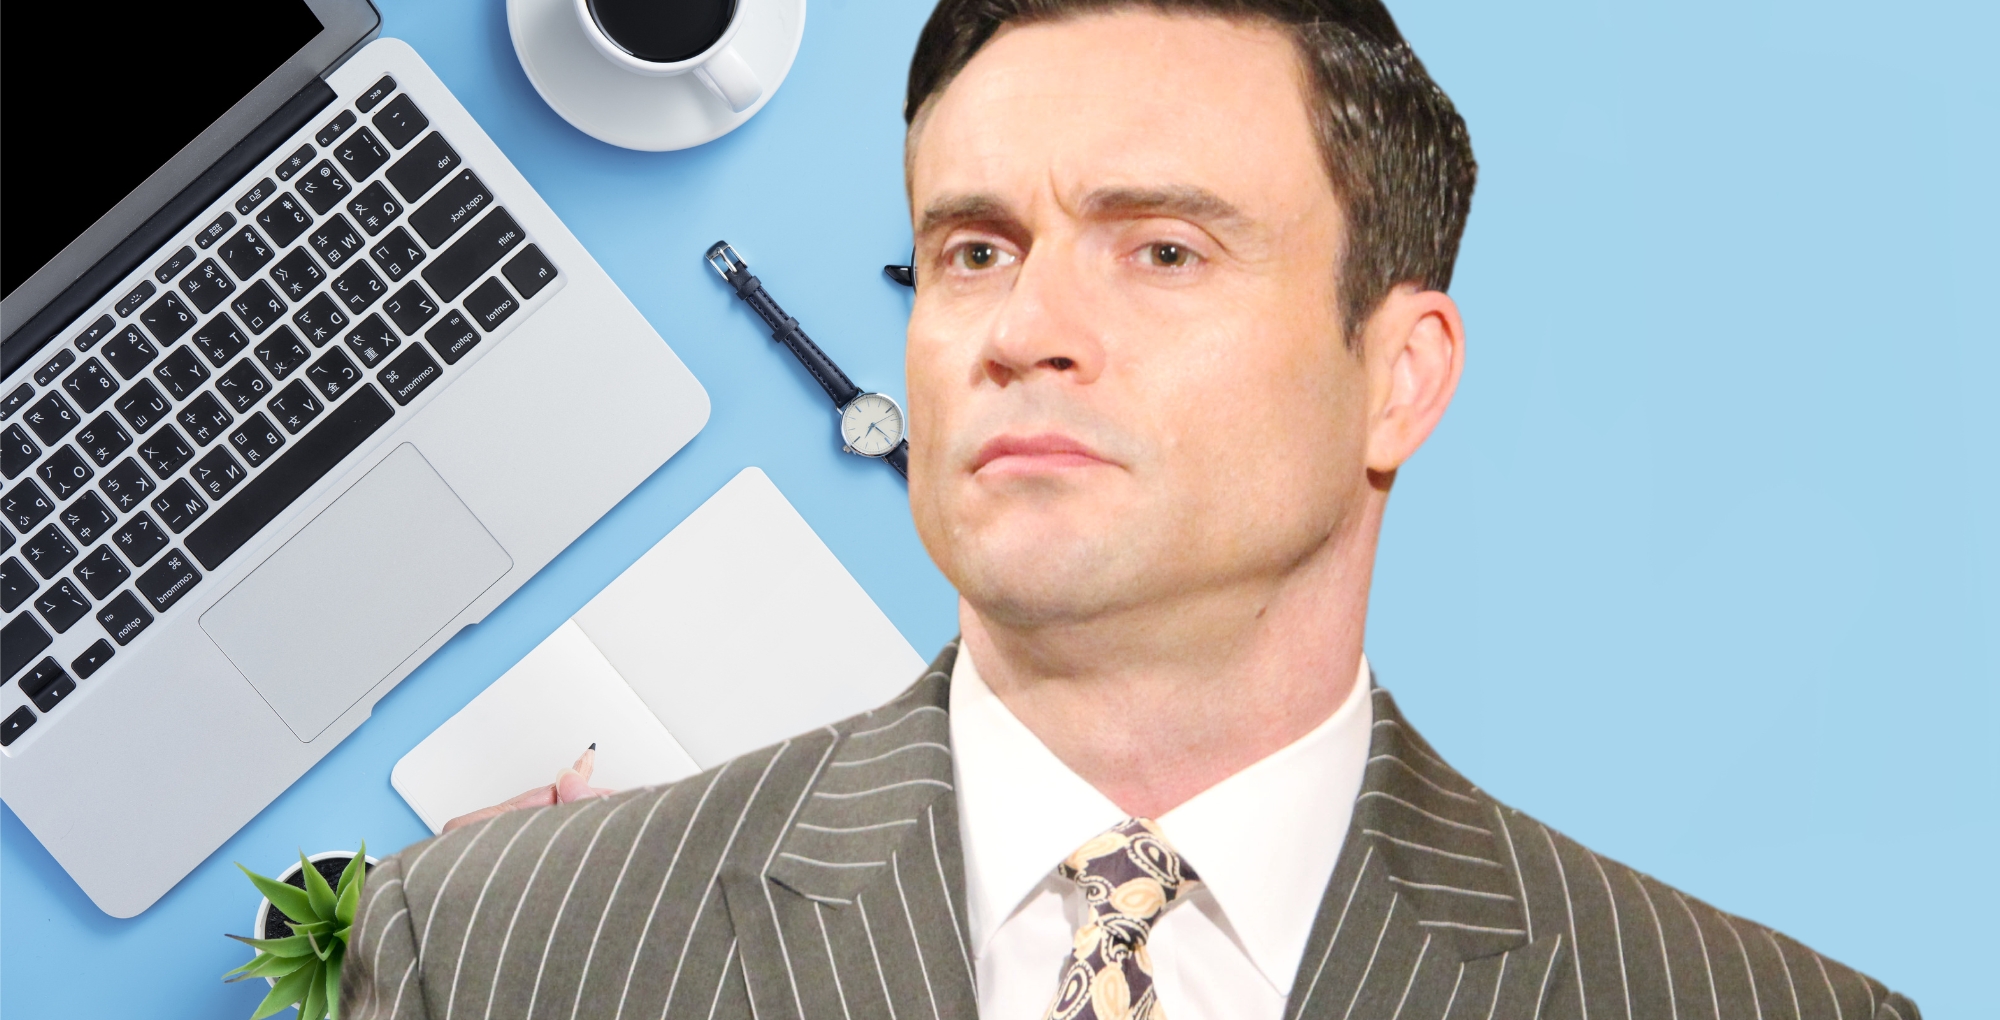 y&r spoilers speculation a laptop, cup of coffee, pen, paper and cane ashby.